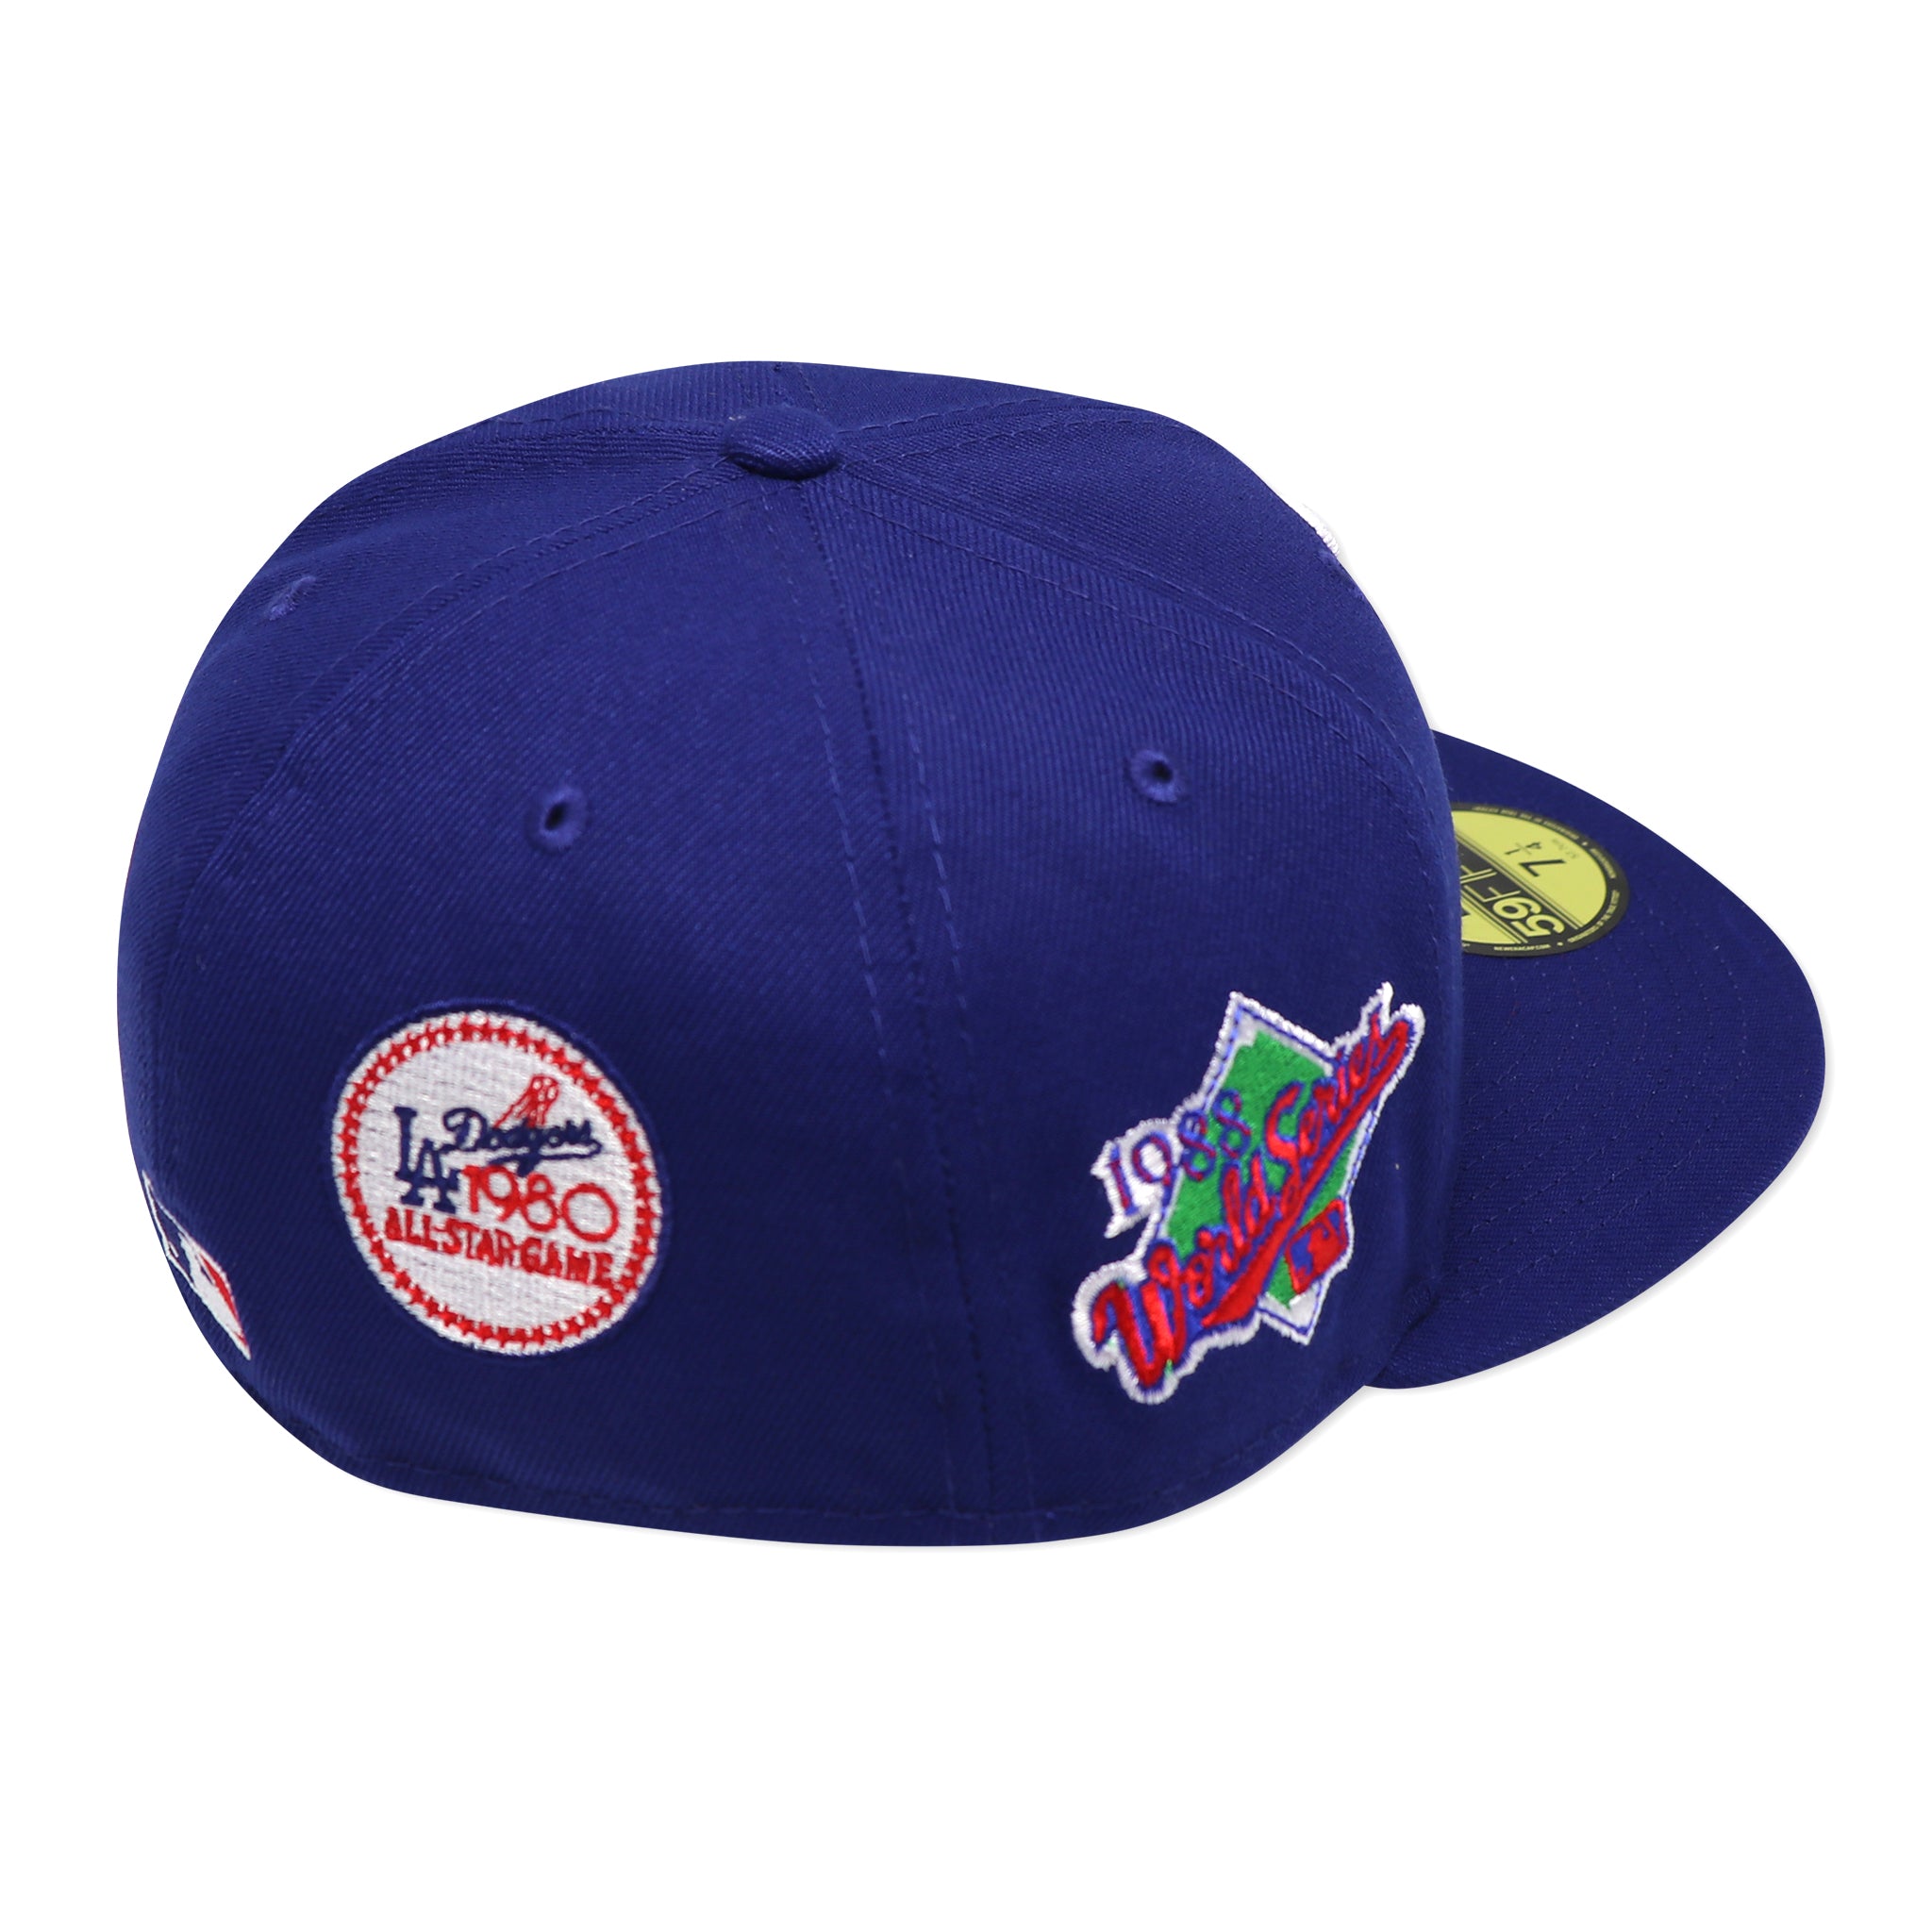 LOS ANGELES DODGERS "1988 WS X 1980 ASG" NEW ERA 59FIFTY FITTED (RED UNDER VISOR)